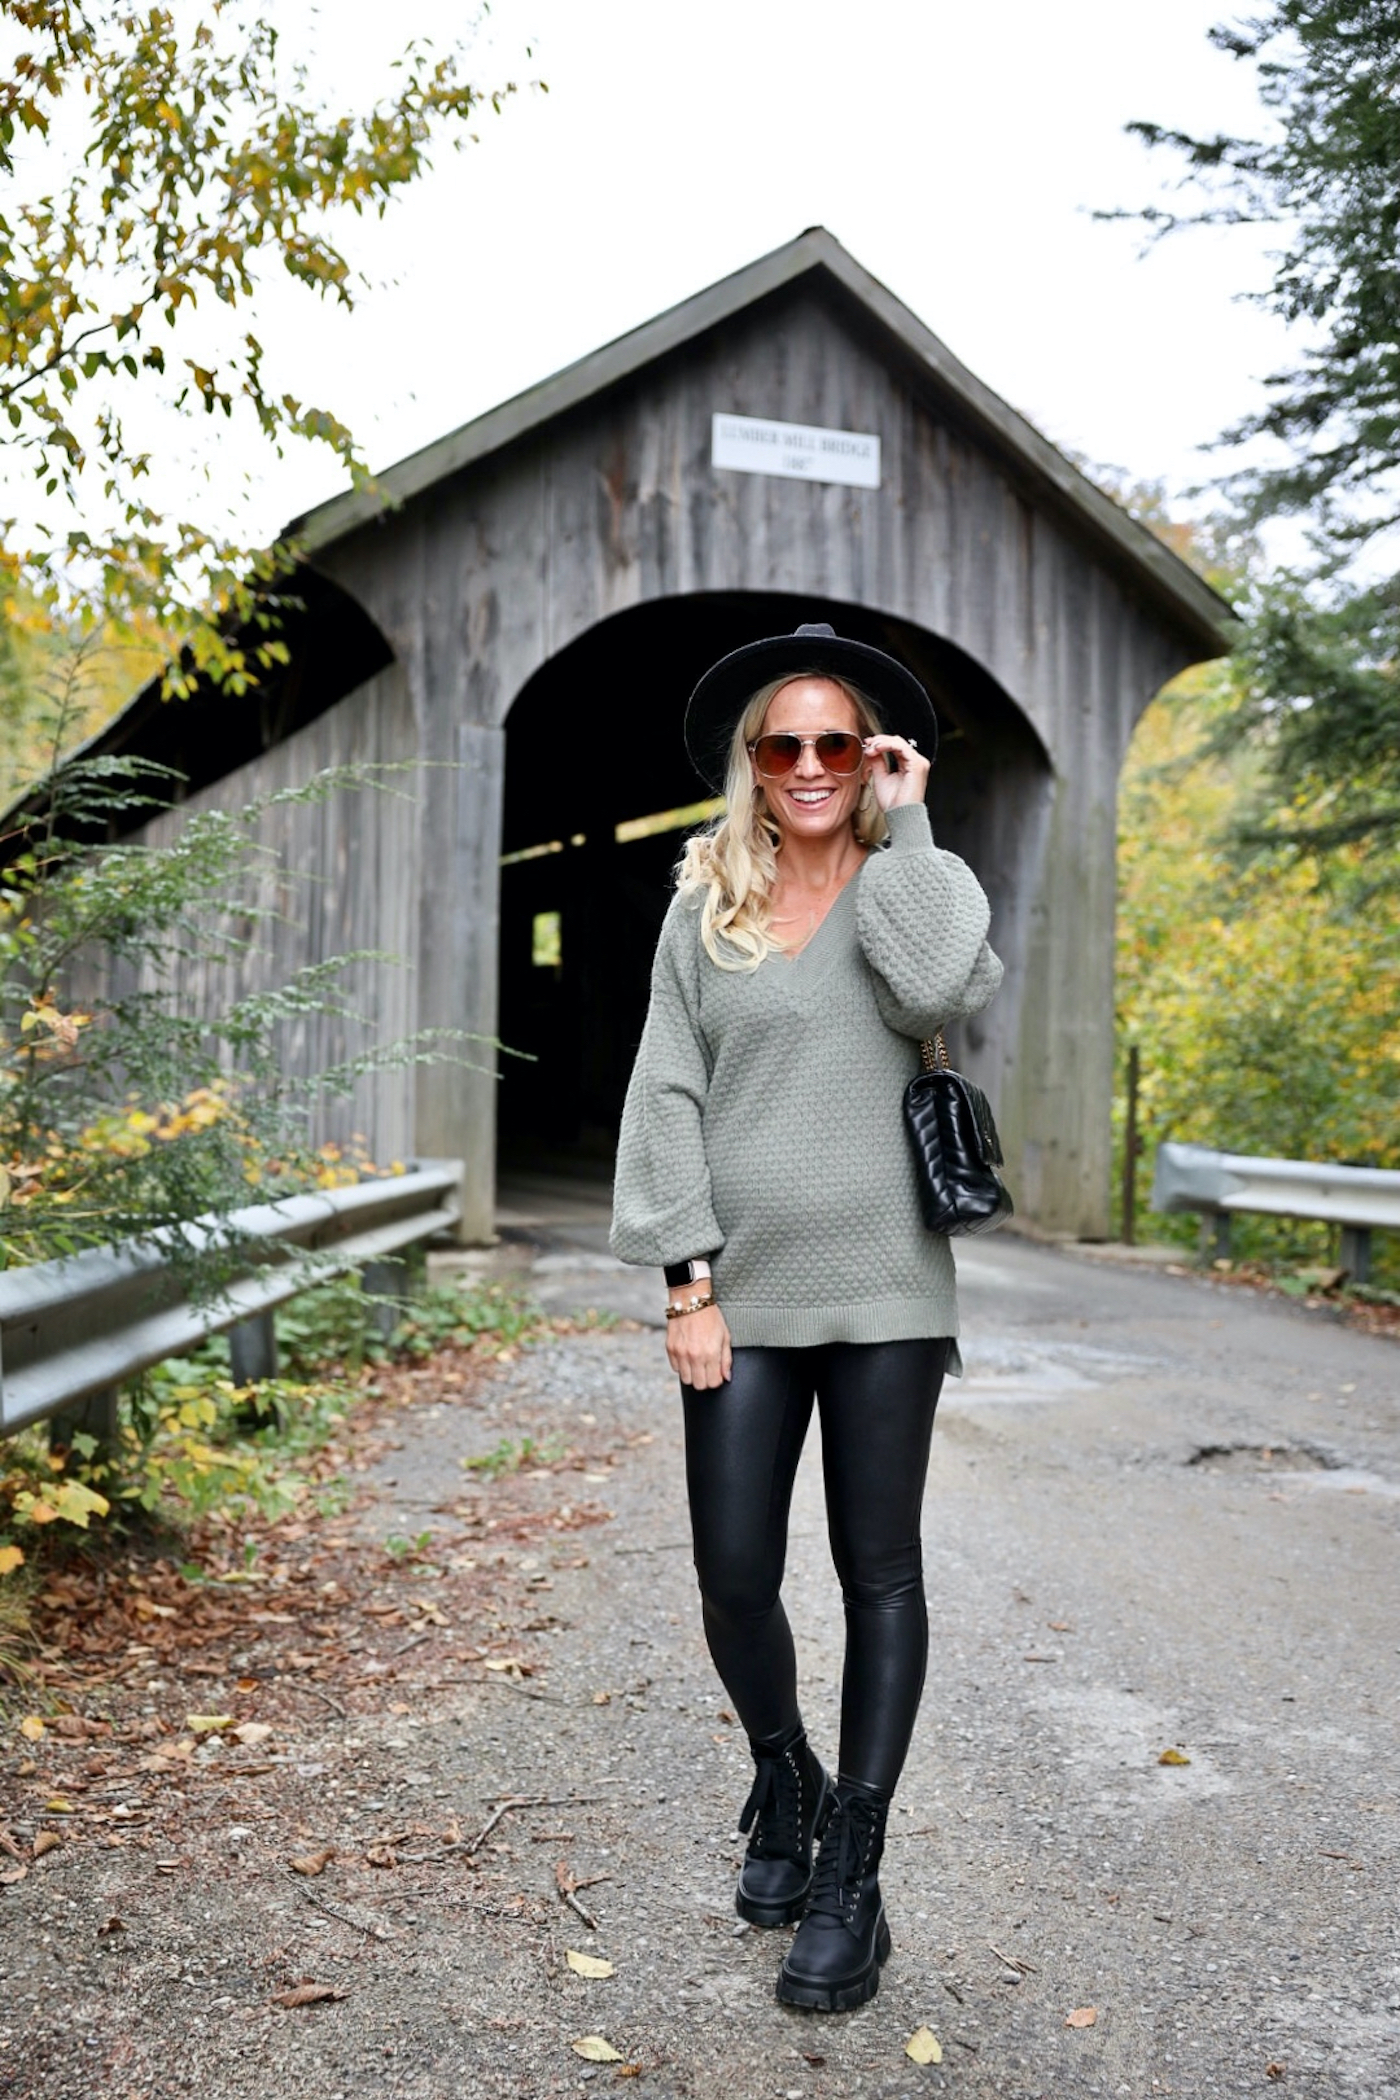 Guide to Stowe, Vermont in the Fall | 11 Things To Do + Tips | Leaf peeper season in Vermont |
 Fall outfit ideas | Maternity outfits in the fall | Covered bridges in Vermont